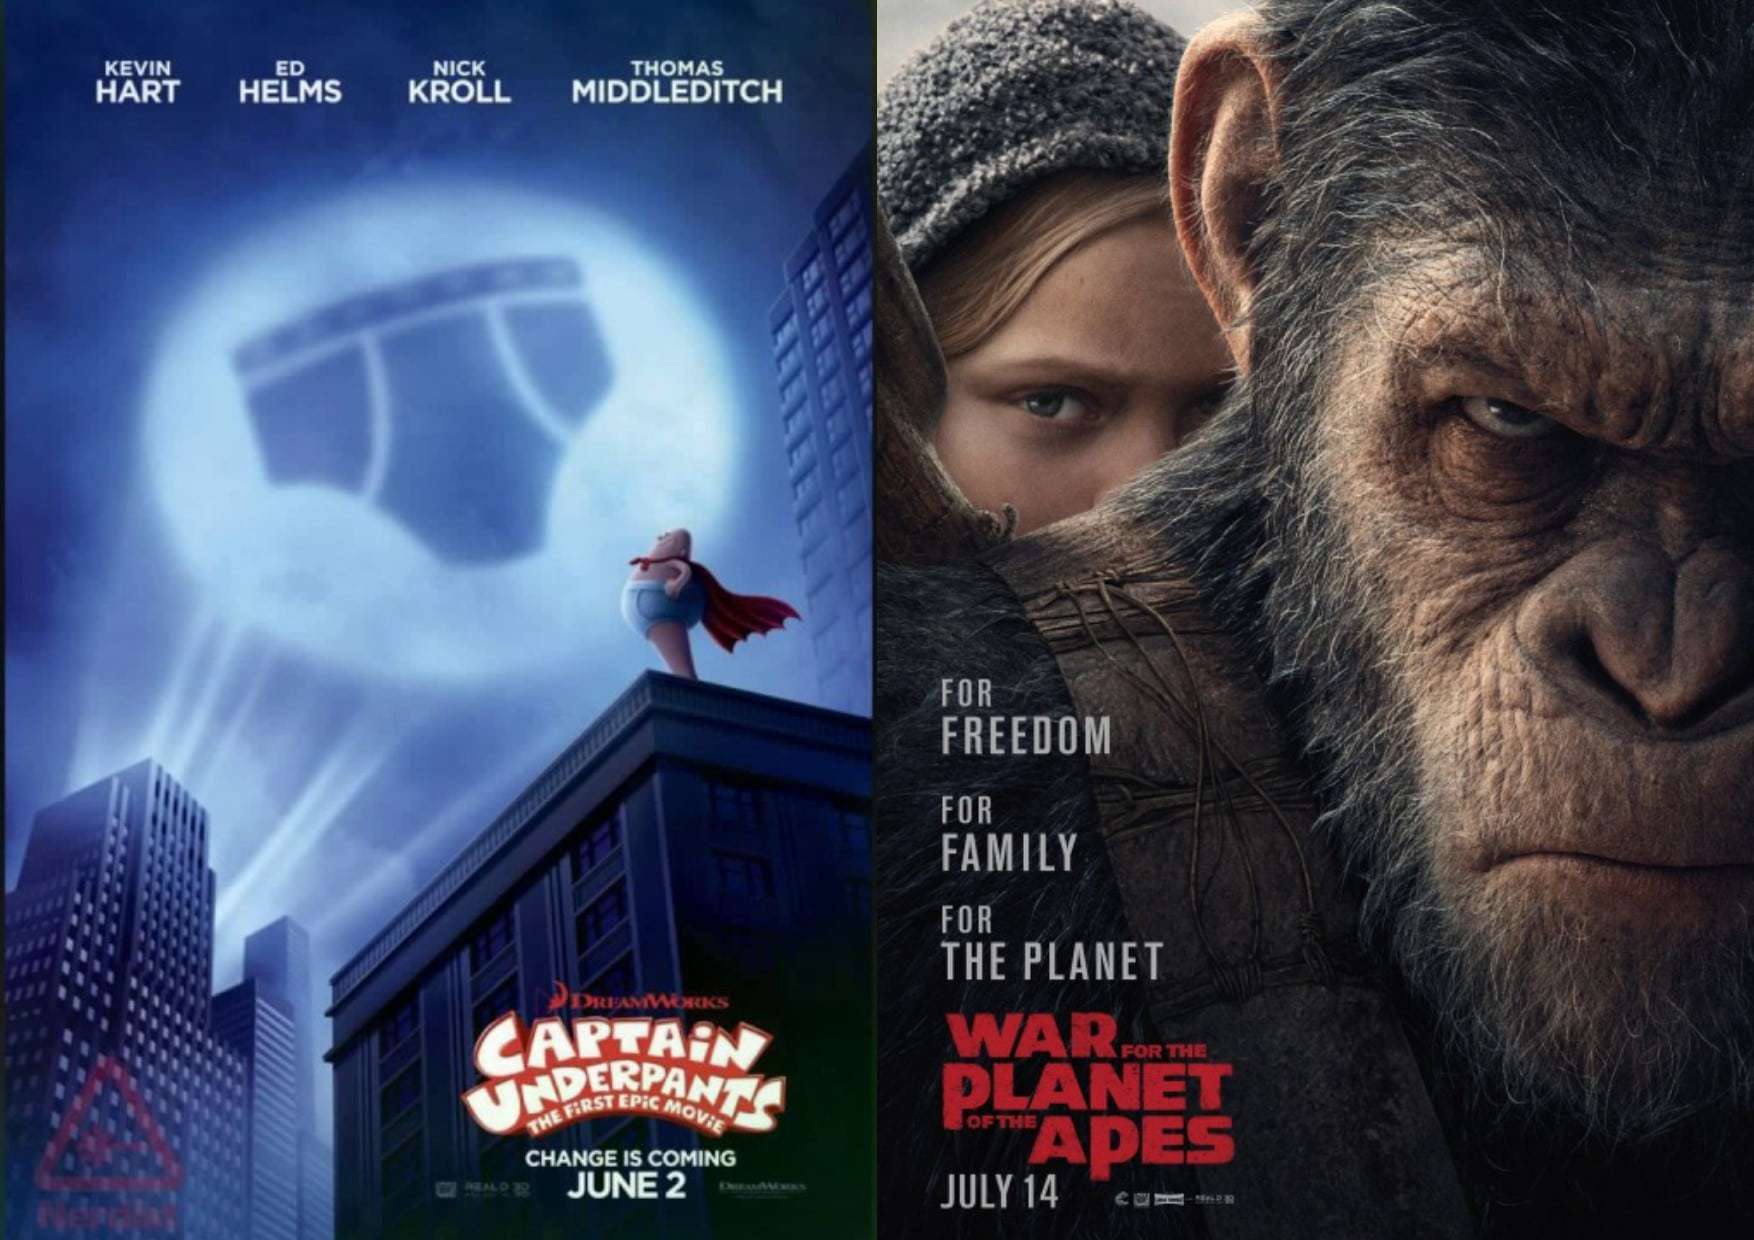 March 24: Captain Underpants braves Planet of the Apes - Ipswich First